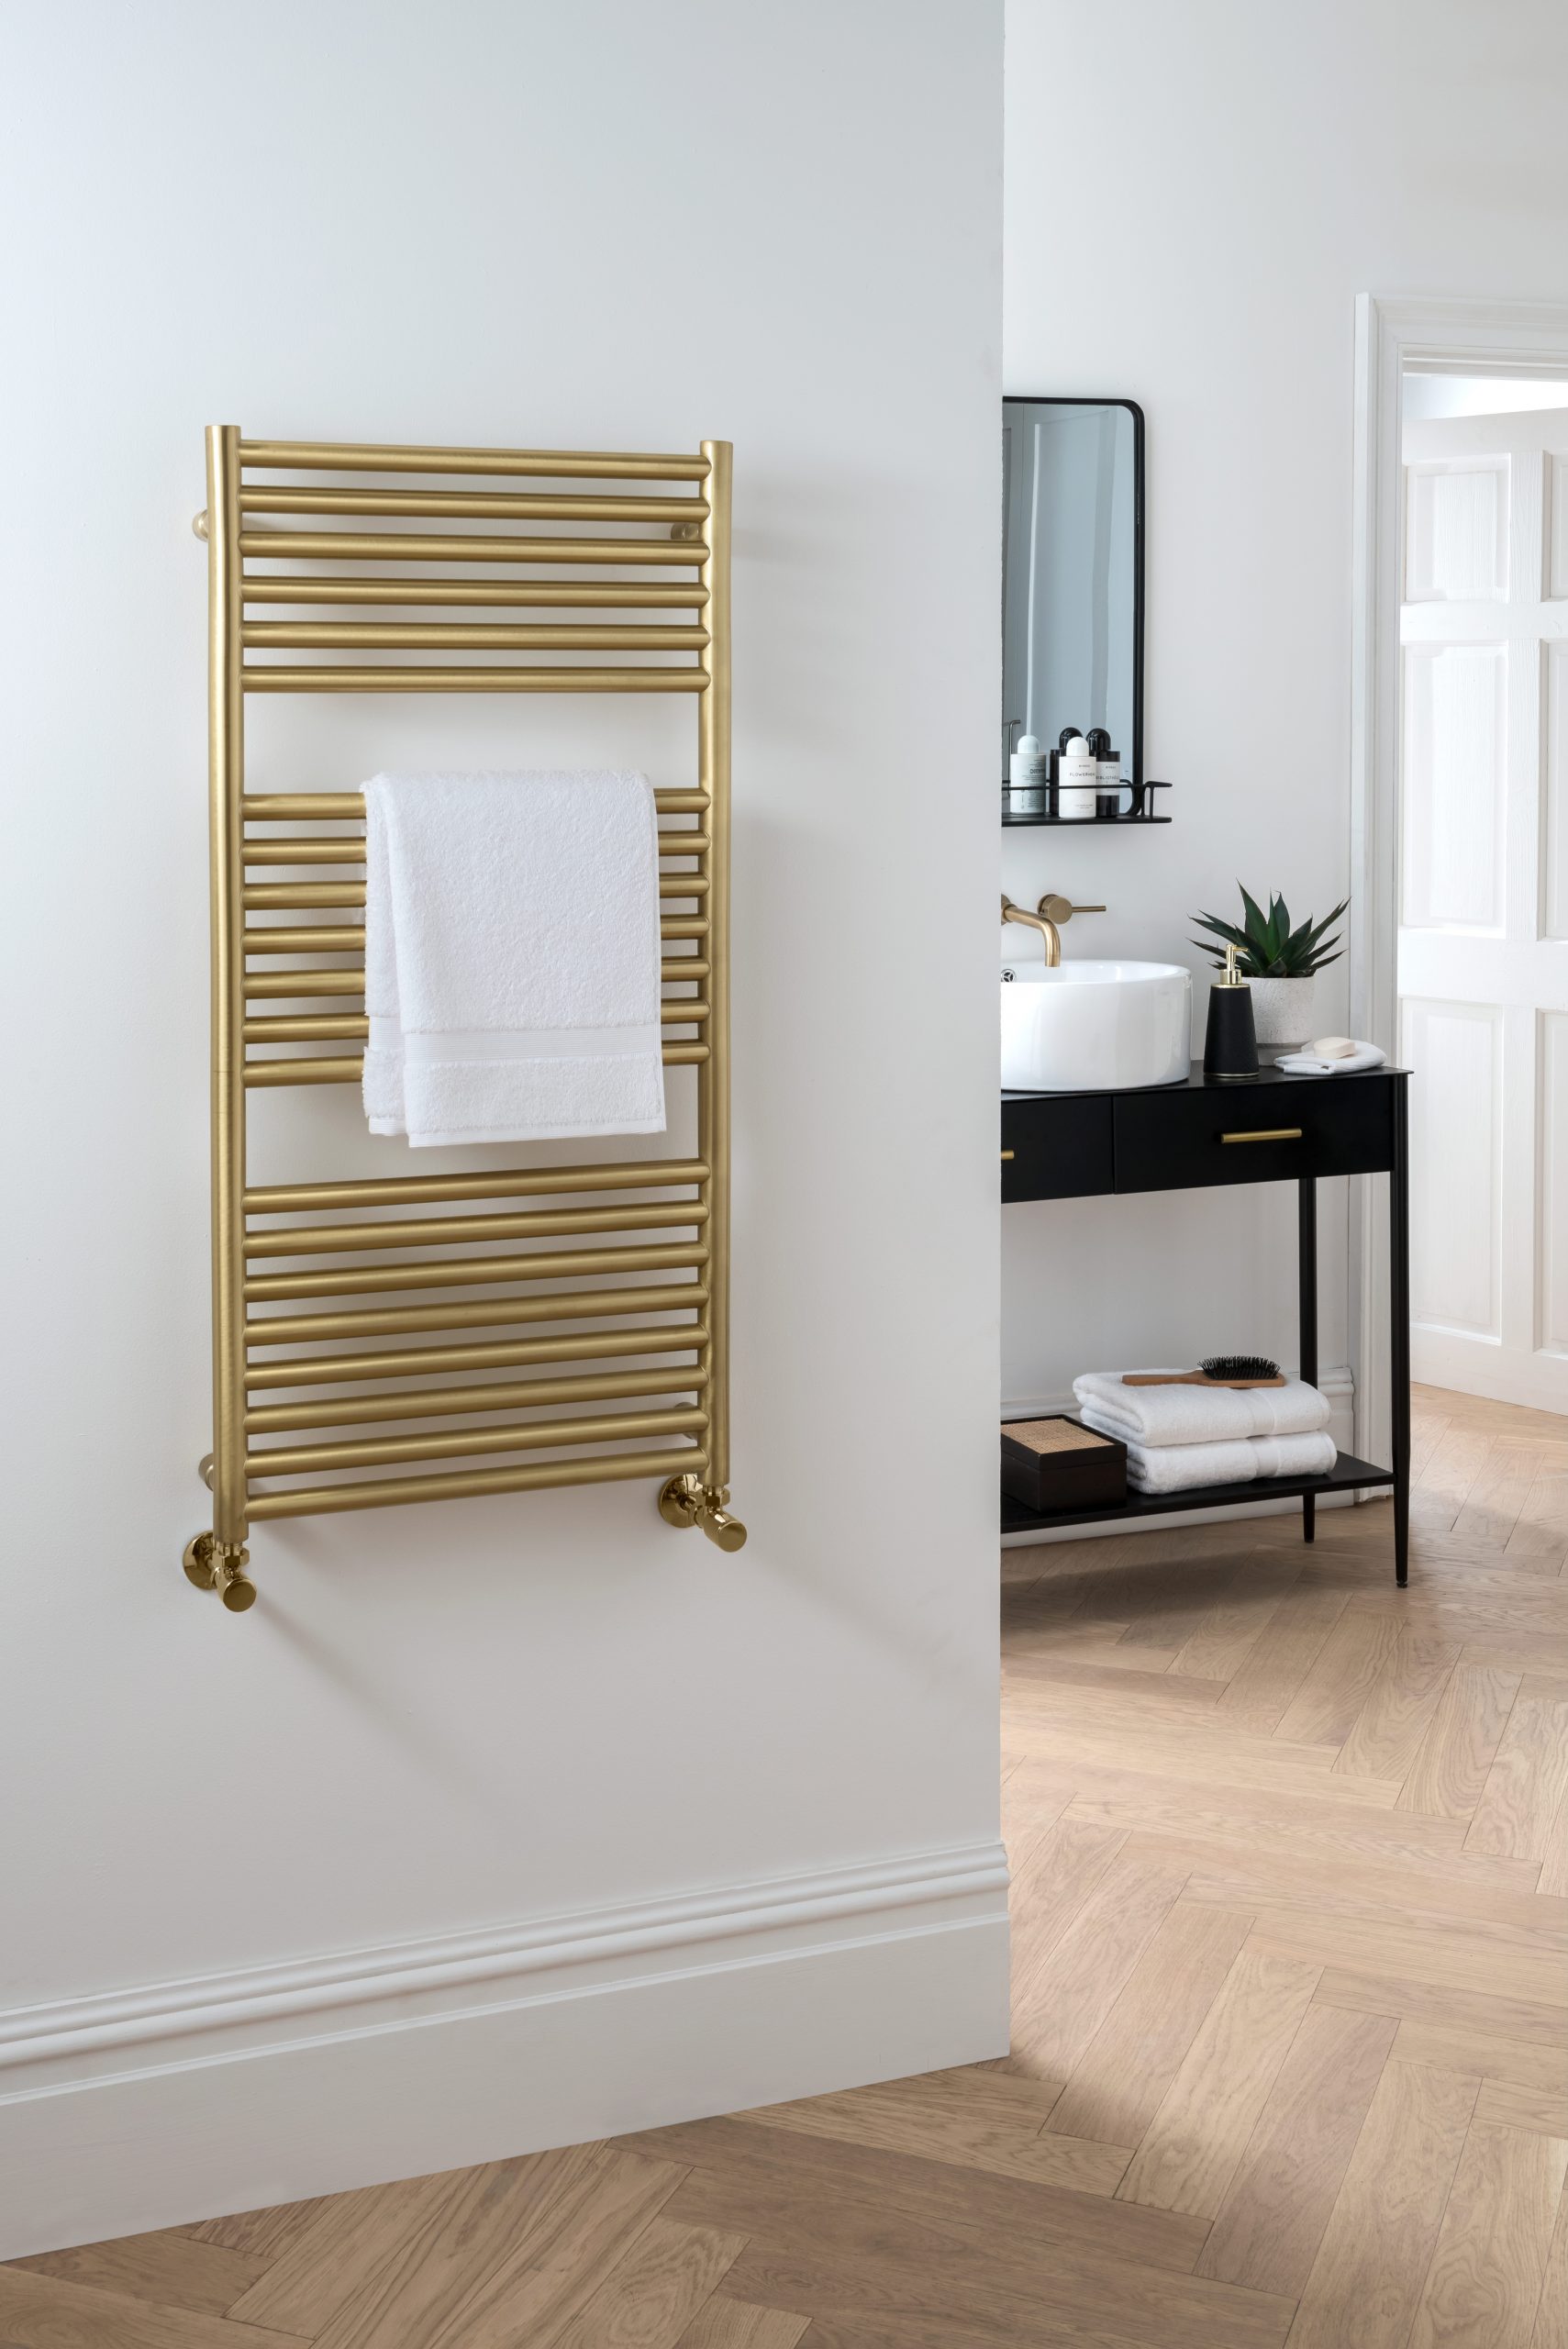 ‘Raw Beauty’ with Studio Brushed Brass by Vogue (UK) @vogueukltd